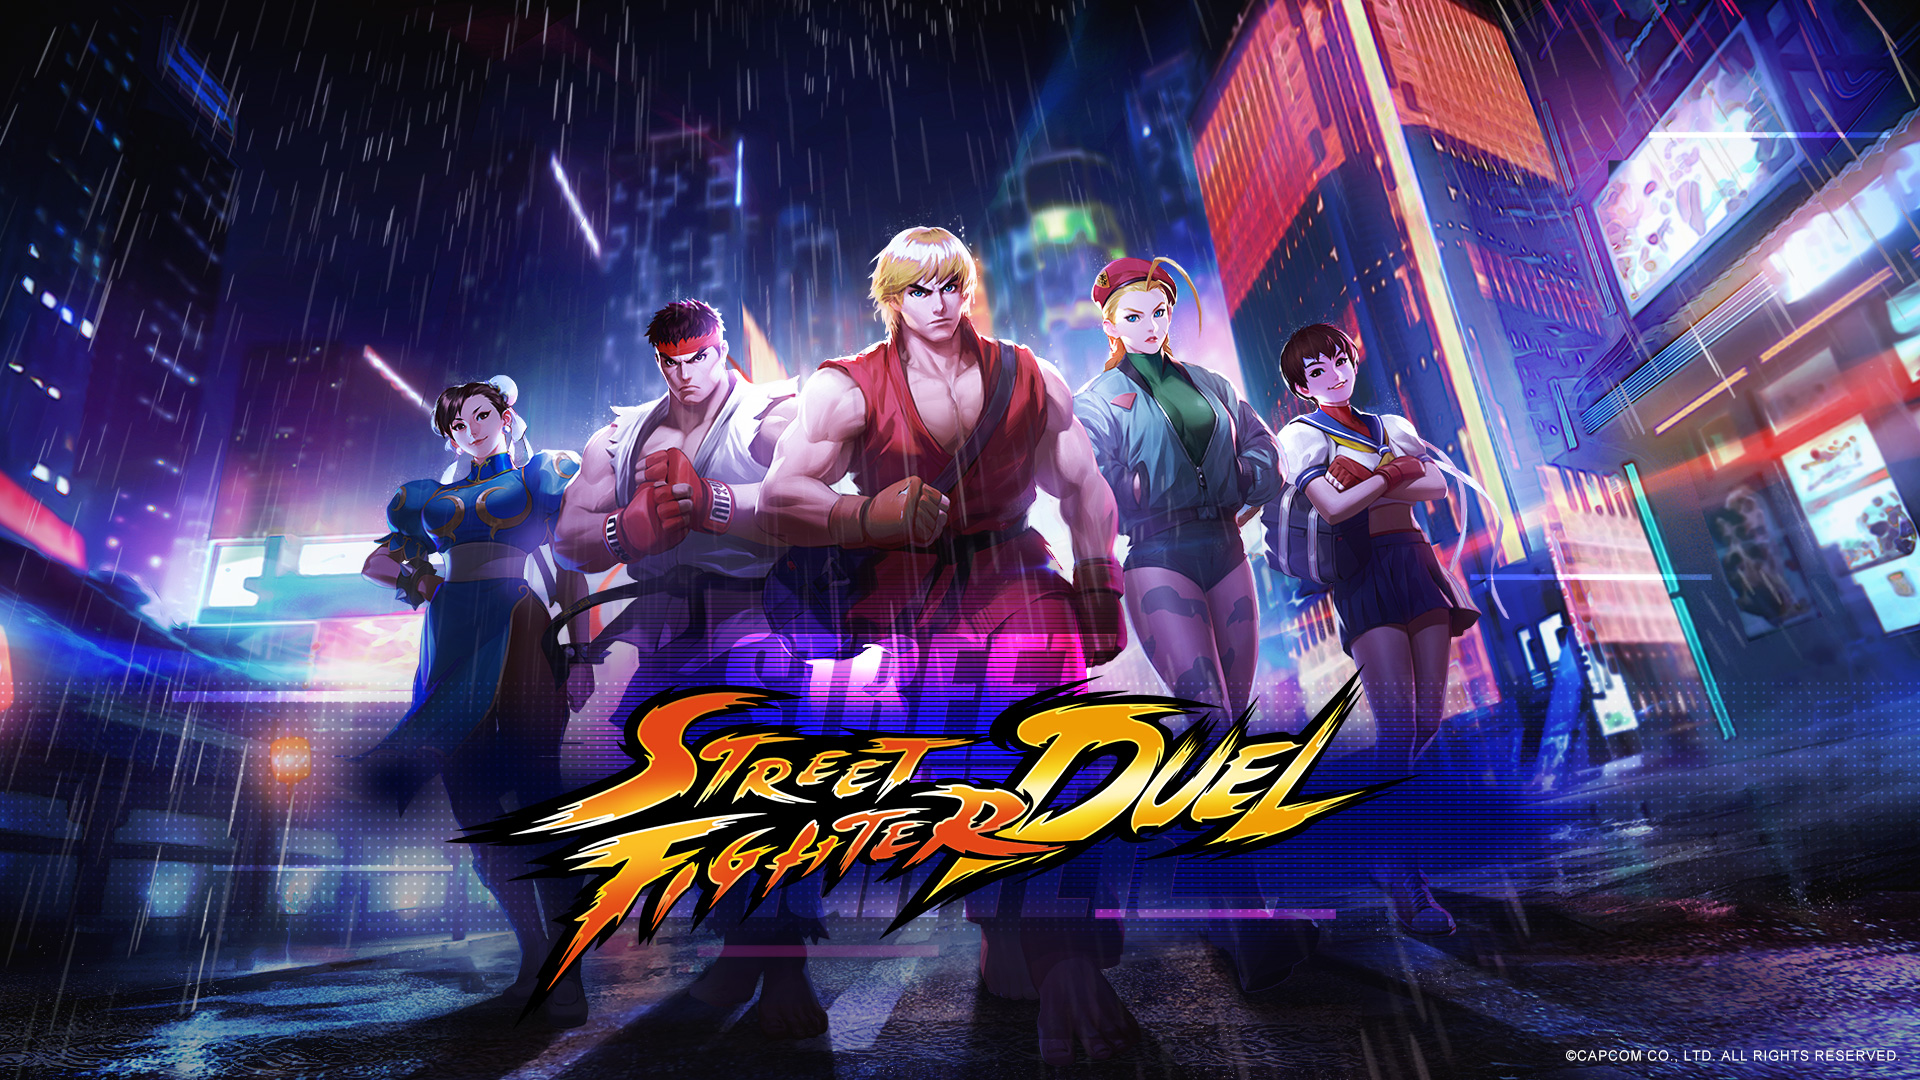 Street Fighter: Duel by Crunchyroll Games on X: The fight against Shadoloo  begins now! 🔥👊 Take to the streets alongside Ryu, Chun-Li, Ken, and more  in the highly-anticipated mobile RPG Street Fighter